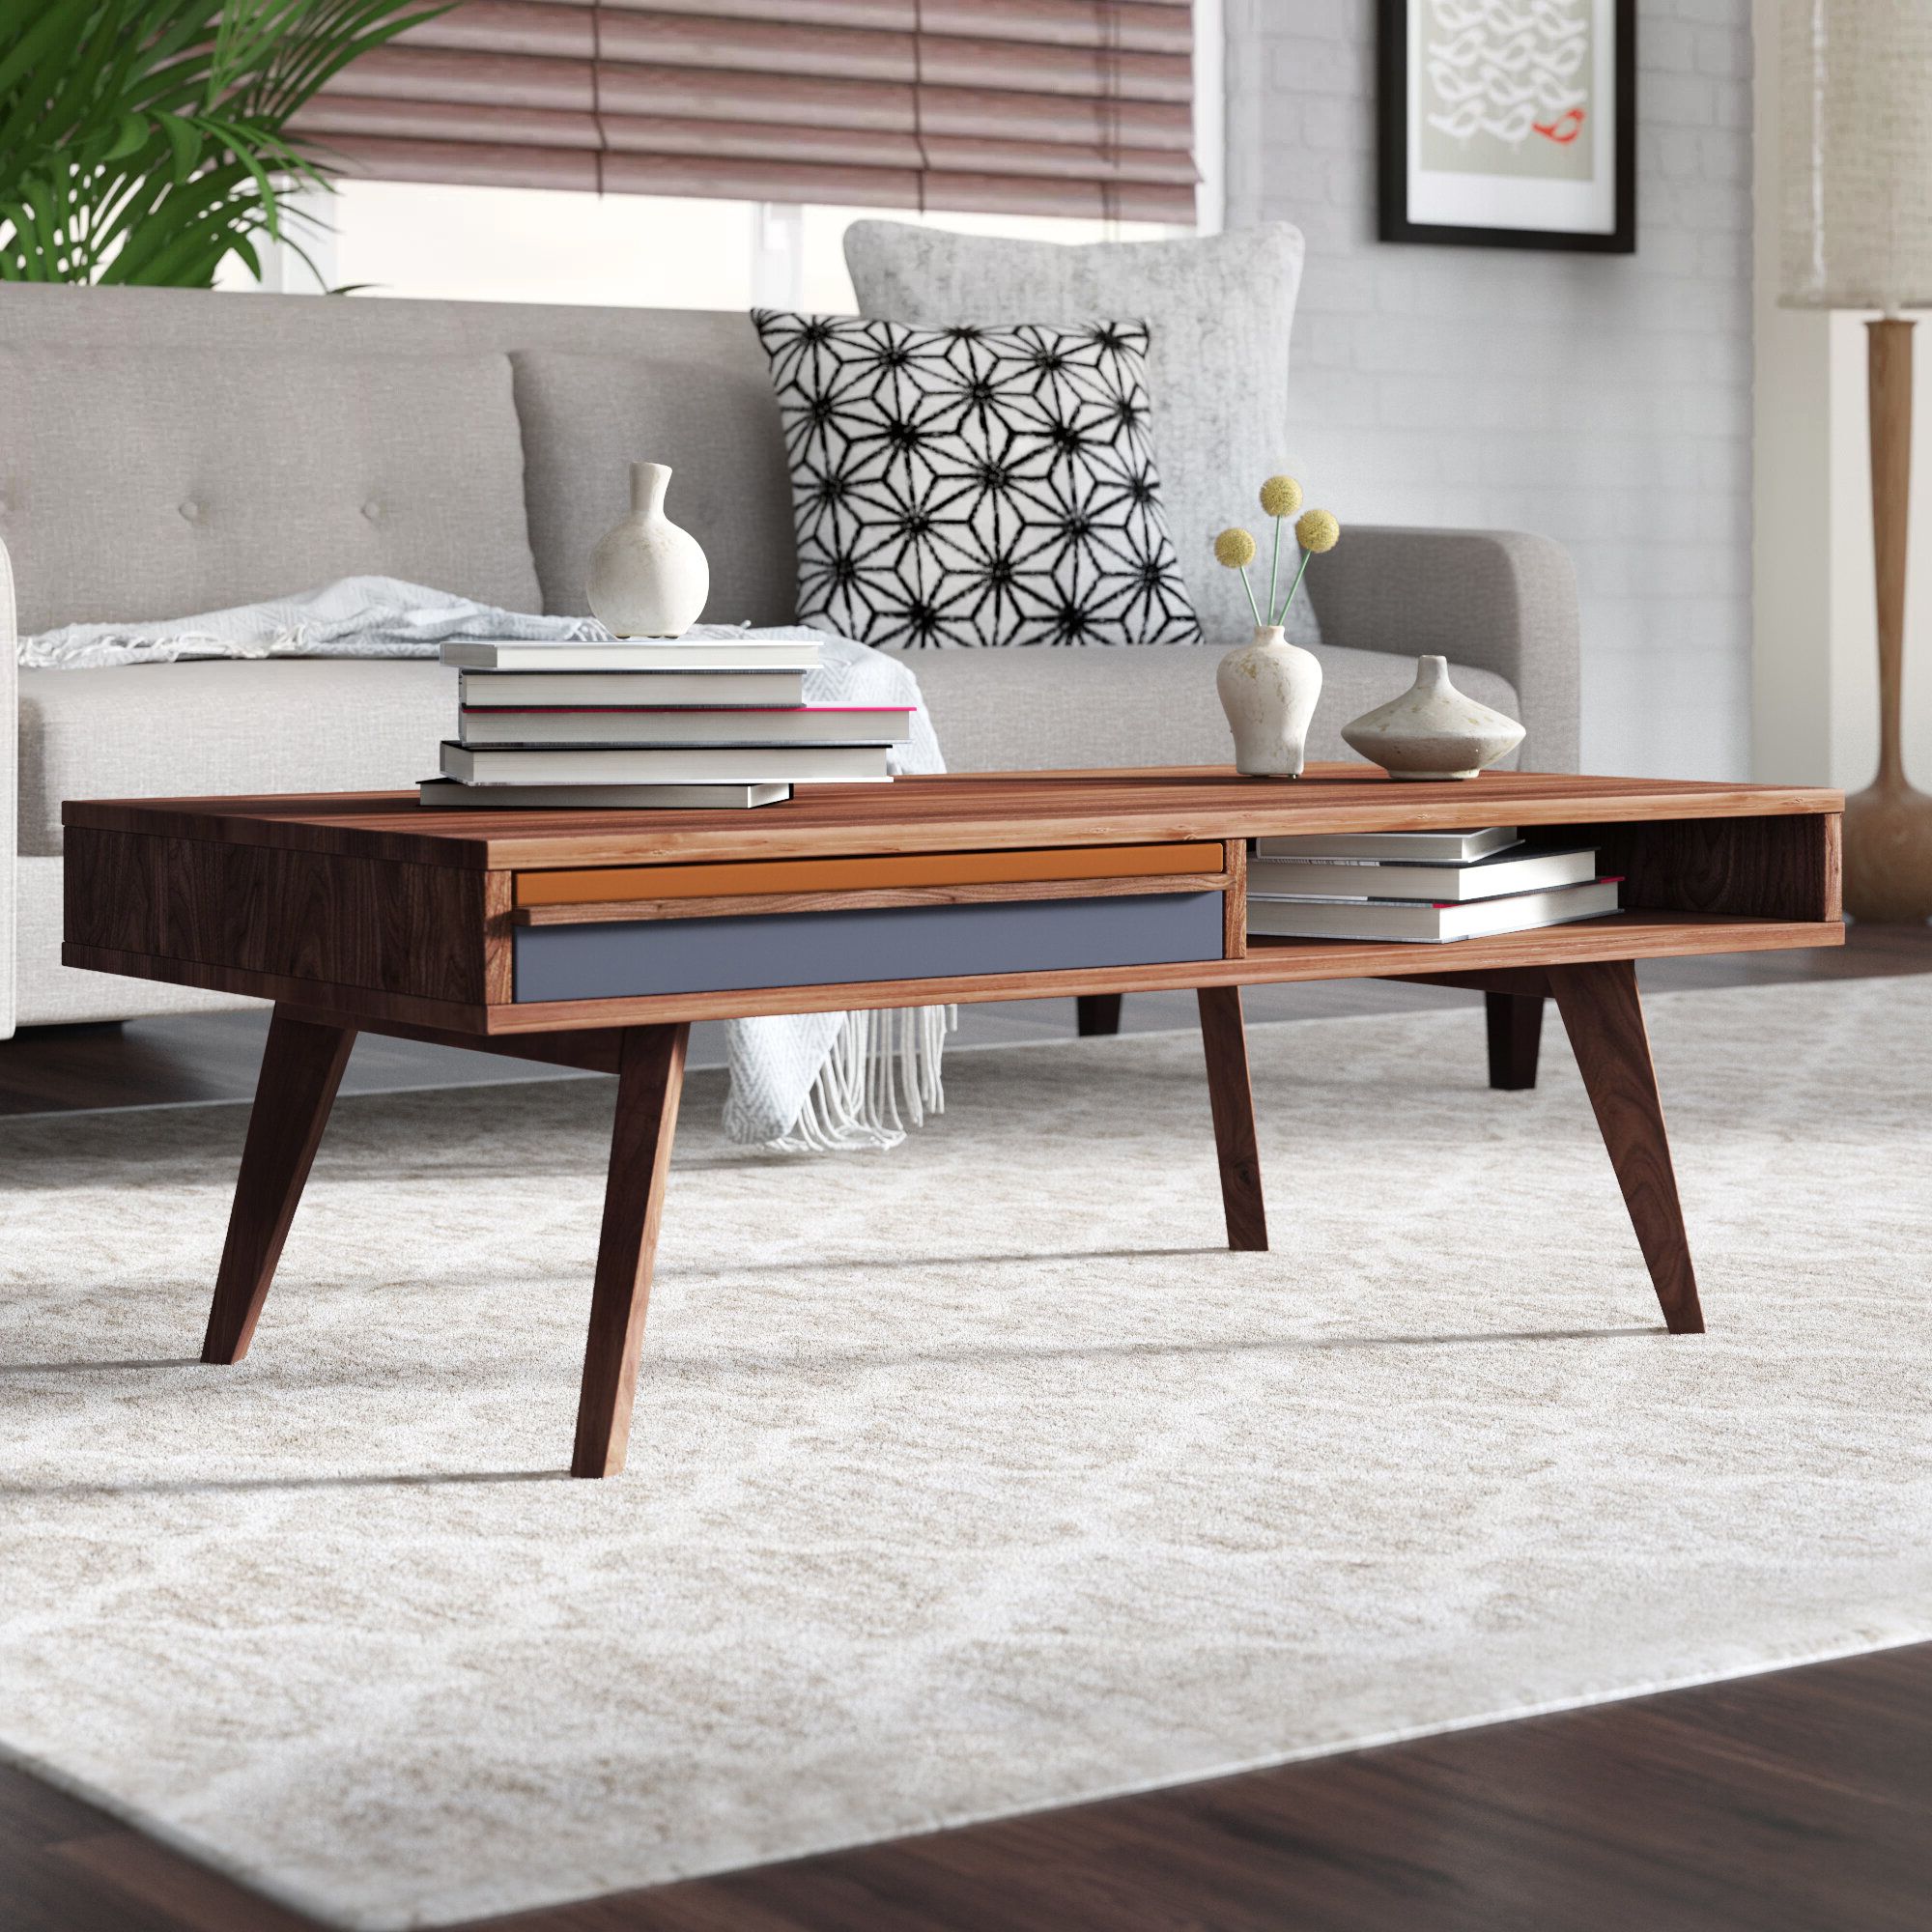 Most Recent Mid Century Modern Coffee Tables Within Mid Century Modern Coffee Table – Ideas On Foter (View 2 of 15)